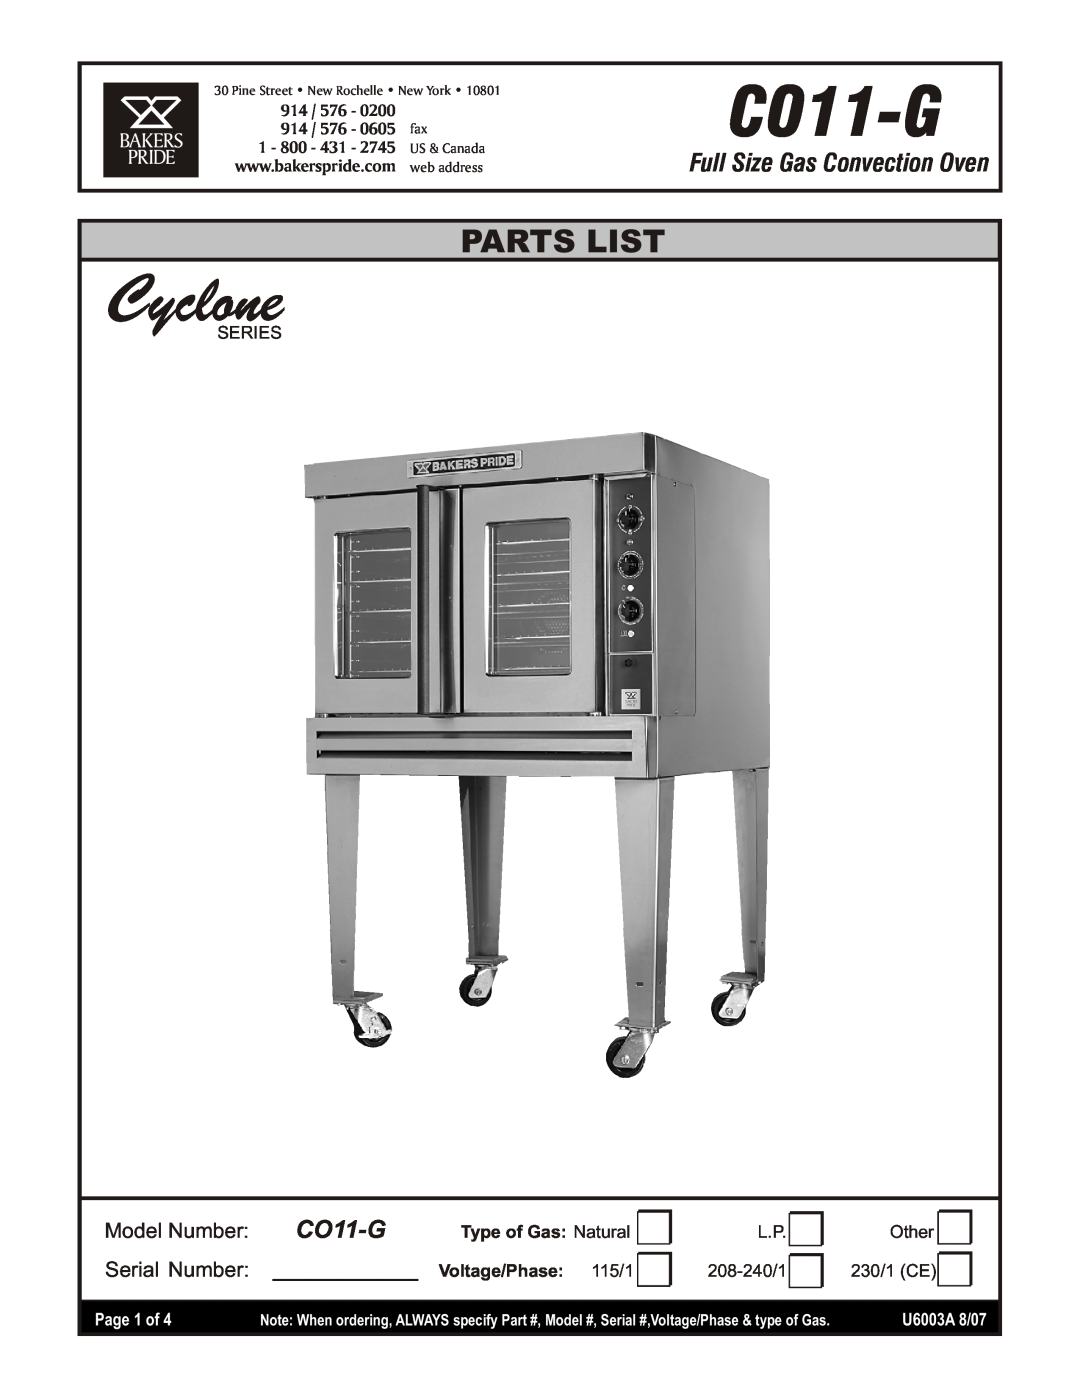 Bakers Pride Oven CO11-G manual Full Size Gas Convection Oven, 0200, 0605, 2745, Series, Type of Gas Natural, Page 1 of 